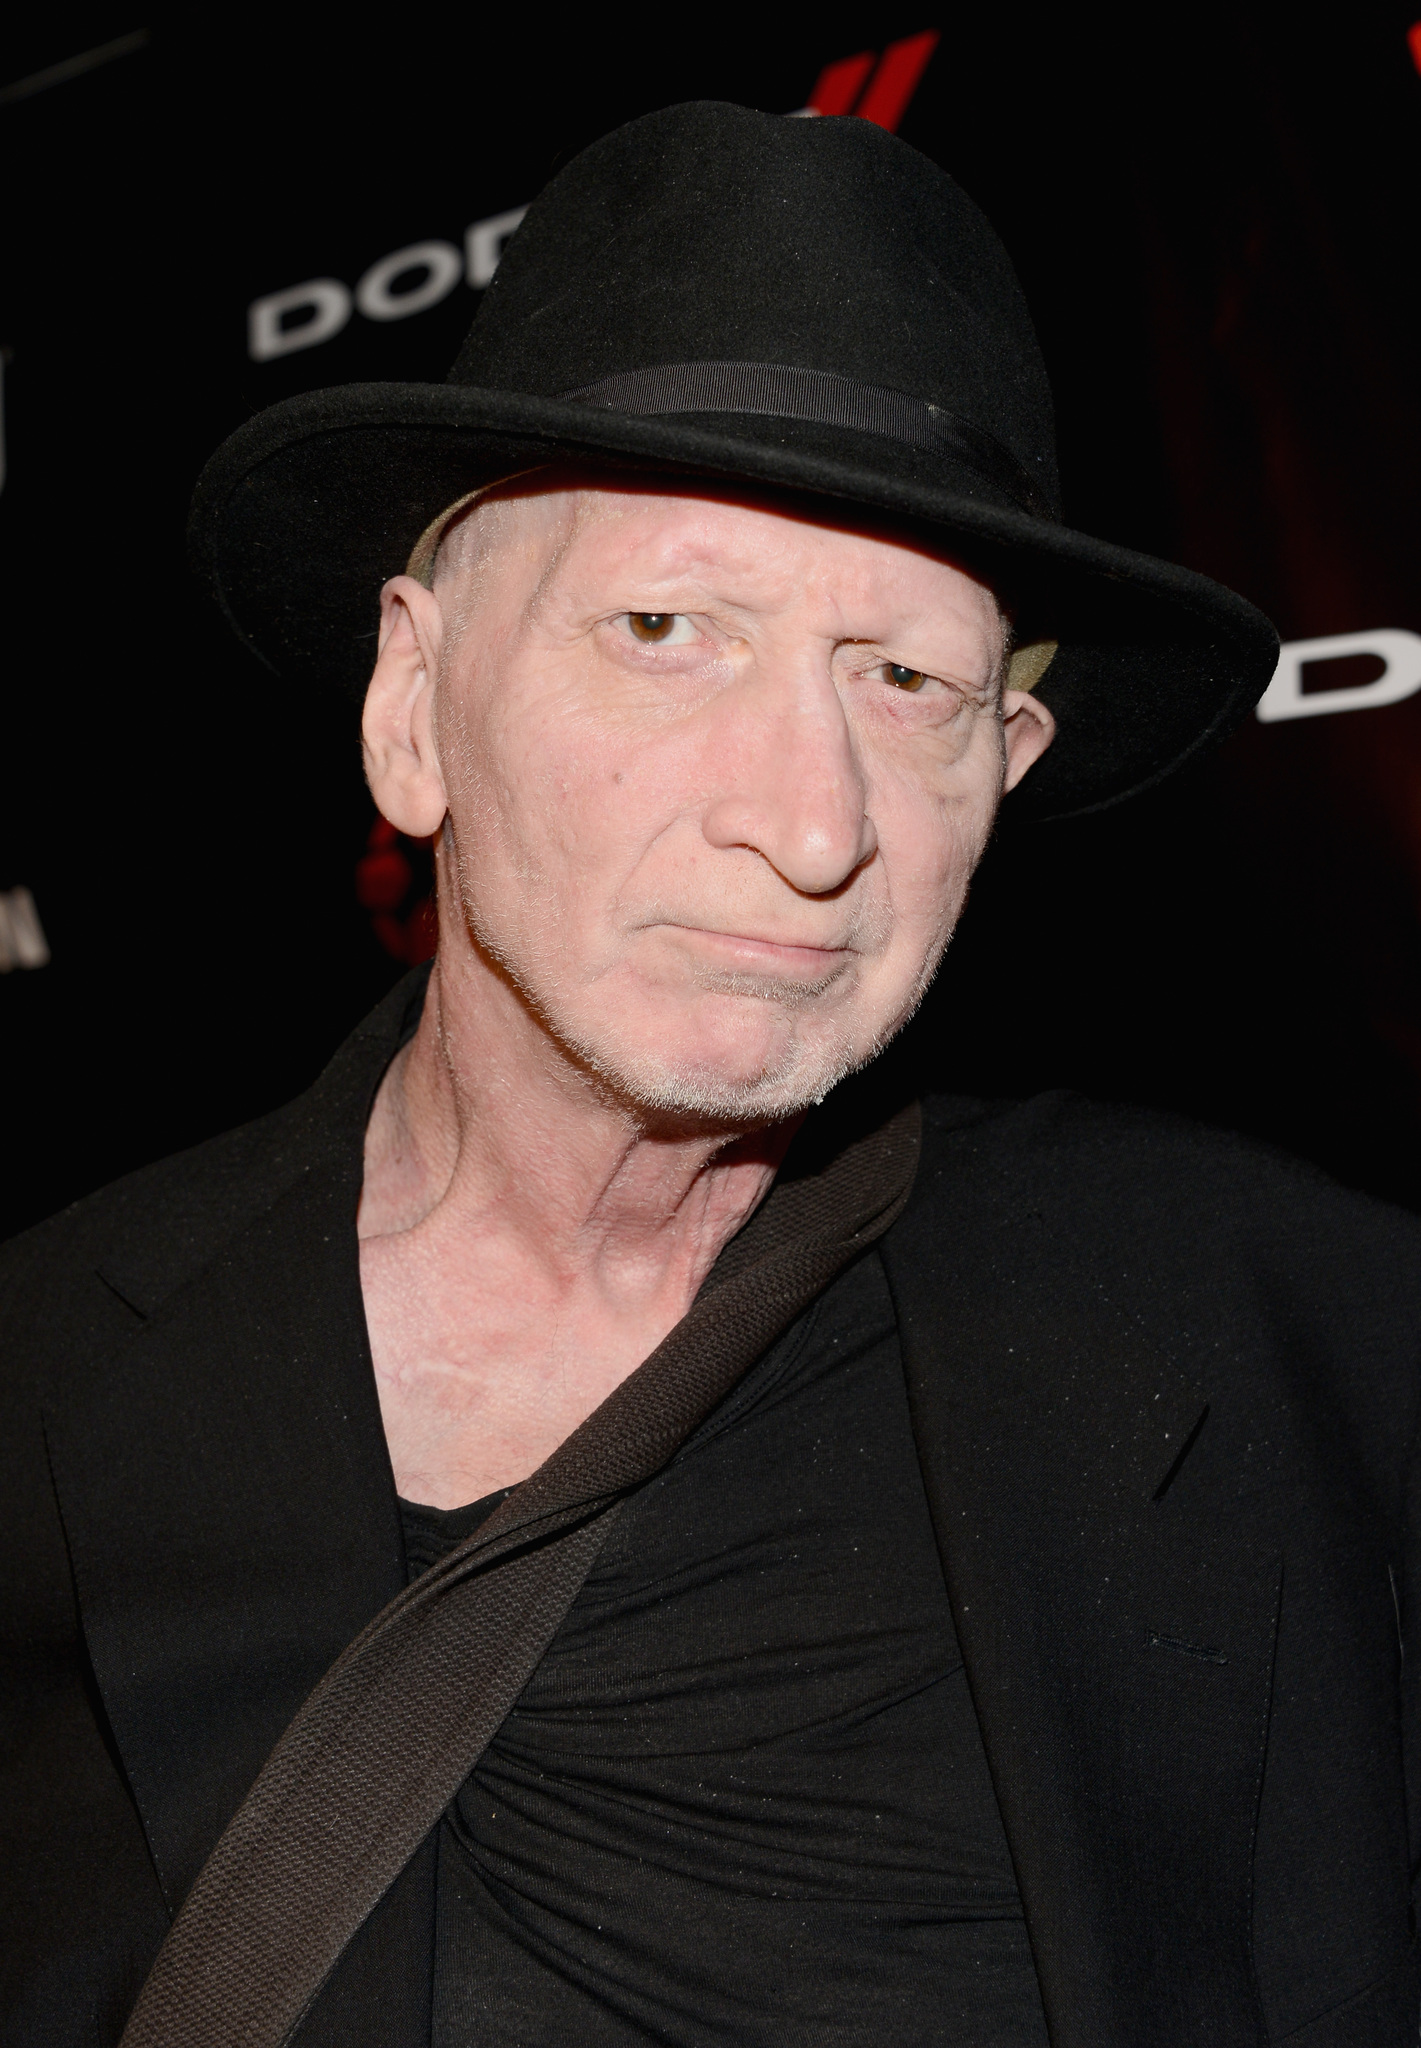 Frank Miller at event of Sin City: A Dame to Kill For (2014)